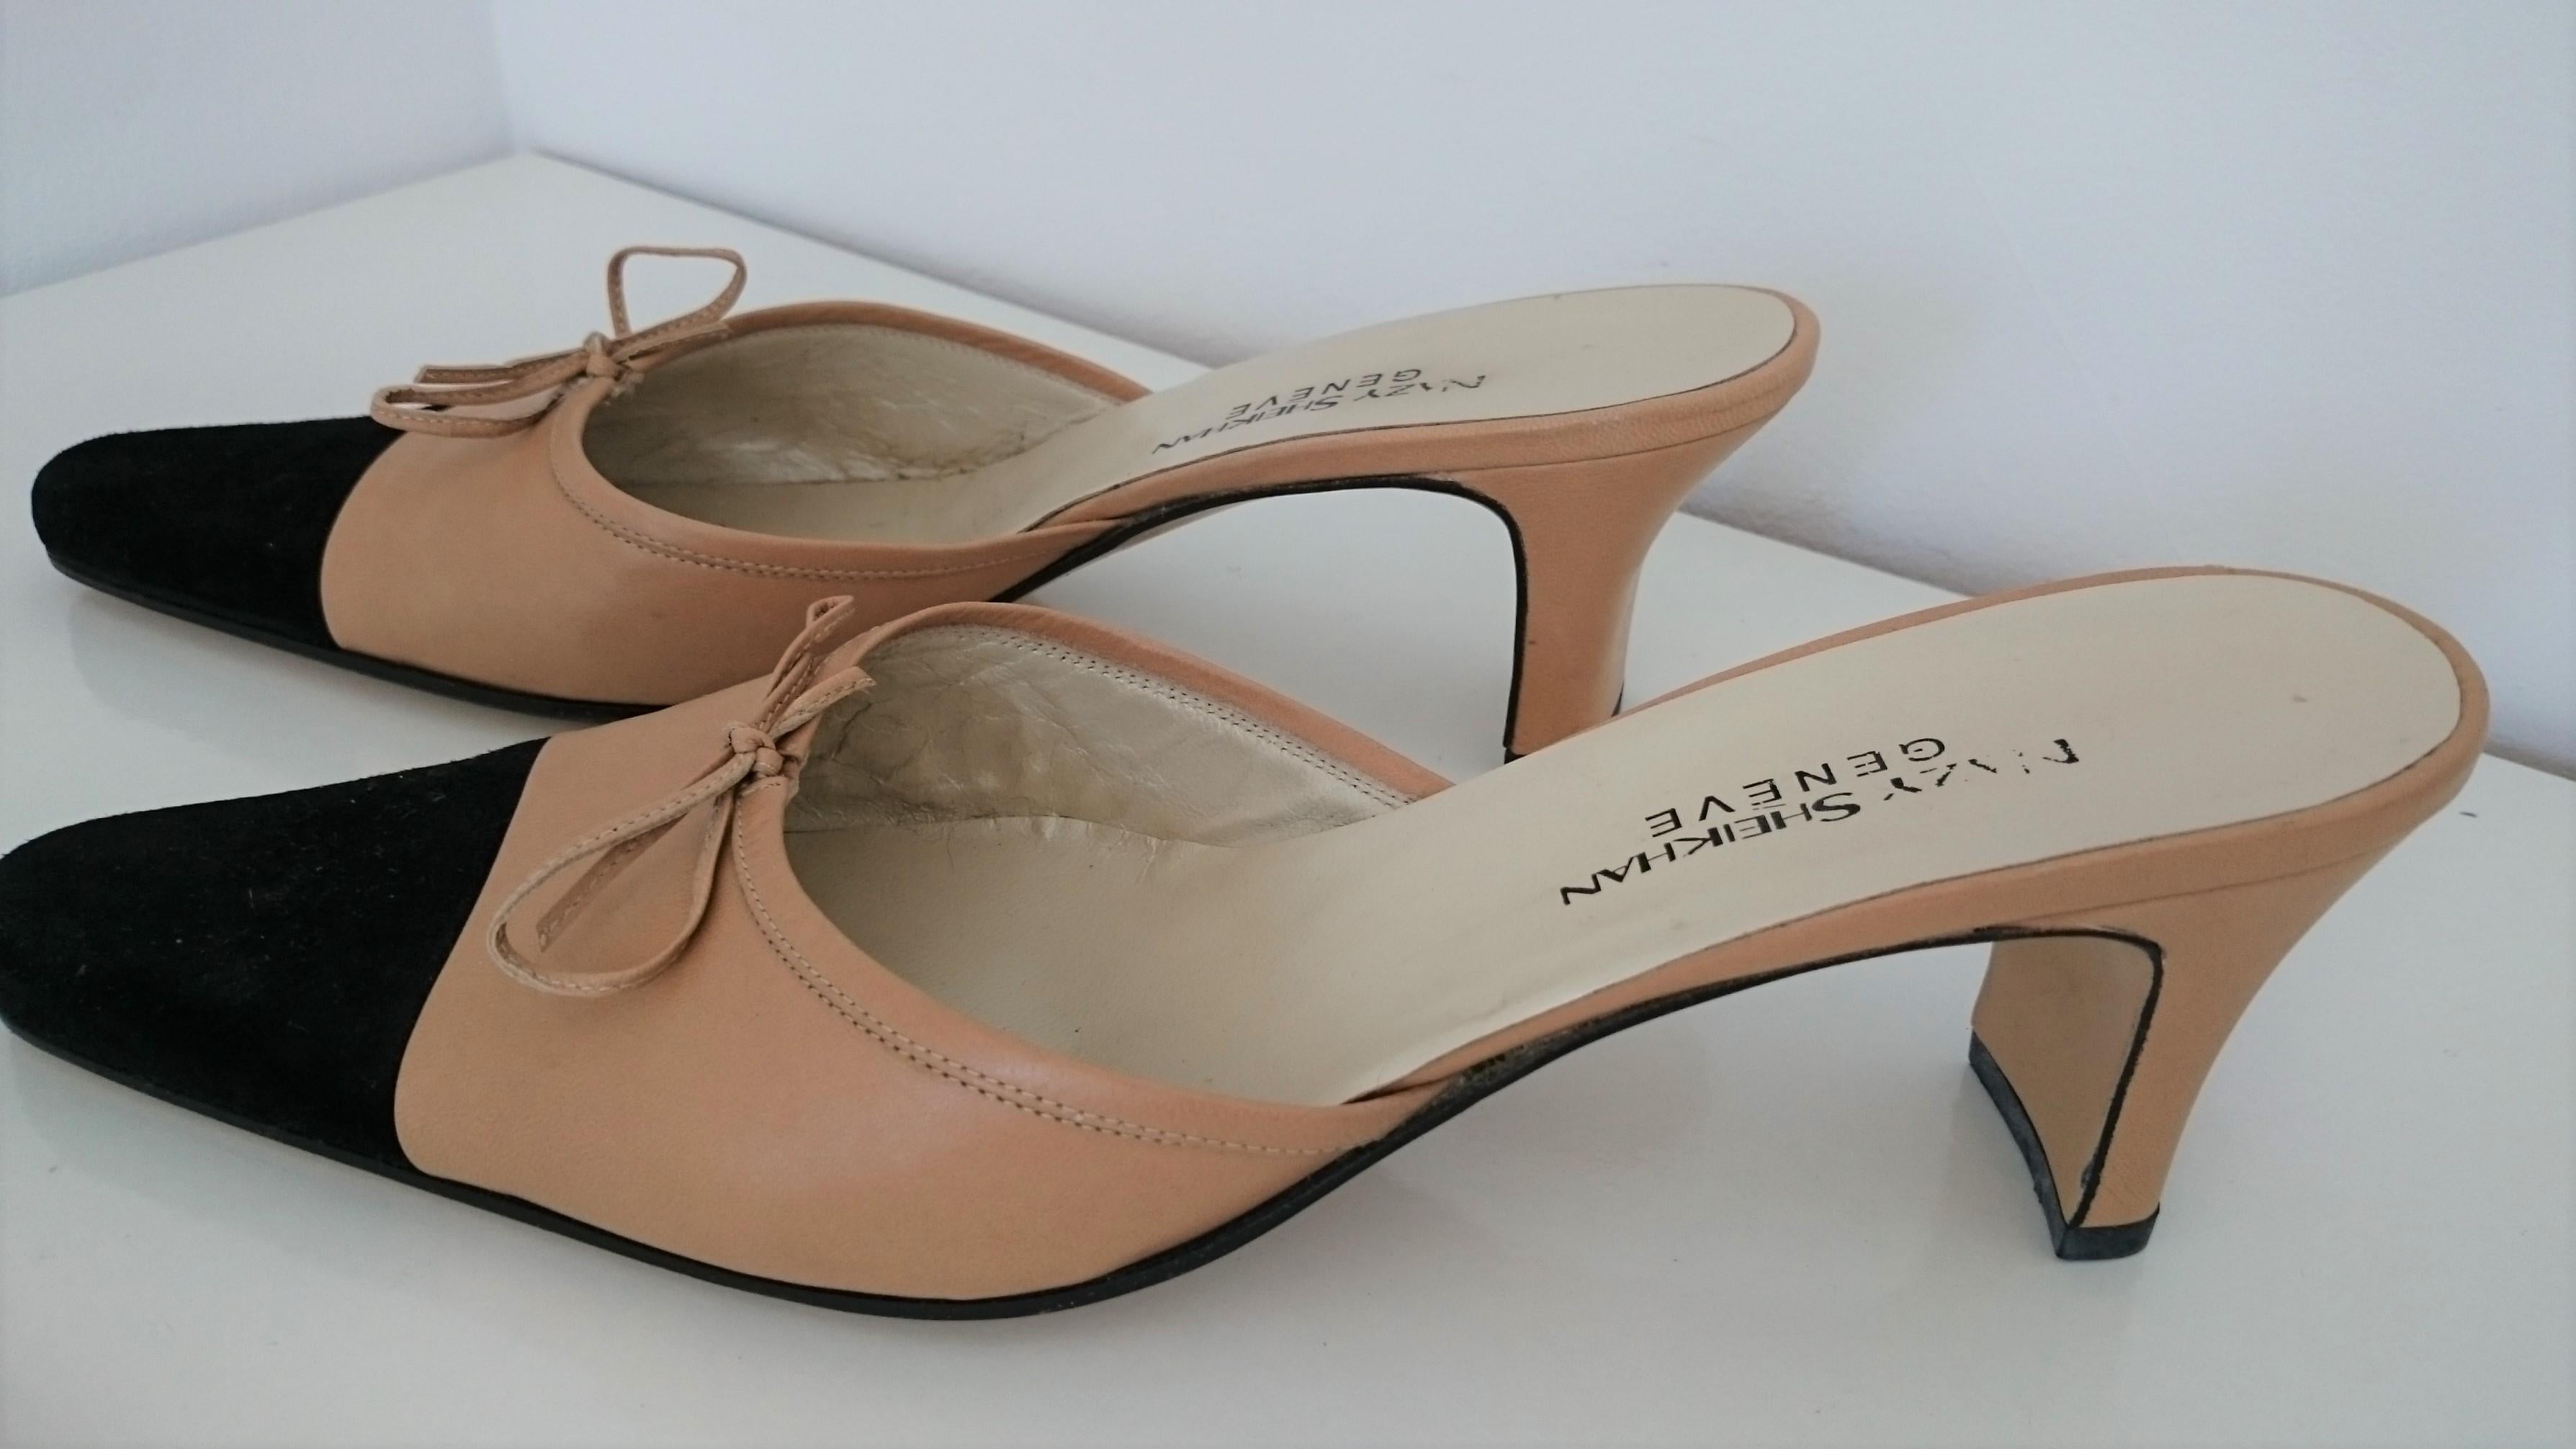 Nazy Sheikhan Bicolor Leather Medium Heels
Colors:Black and Beige 
Heel height: 6.5 cm
Conditions: New but kept between other shoes for a long time. On the back they have small scratches. You can see that they are not used by looking at the